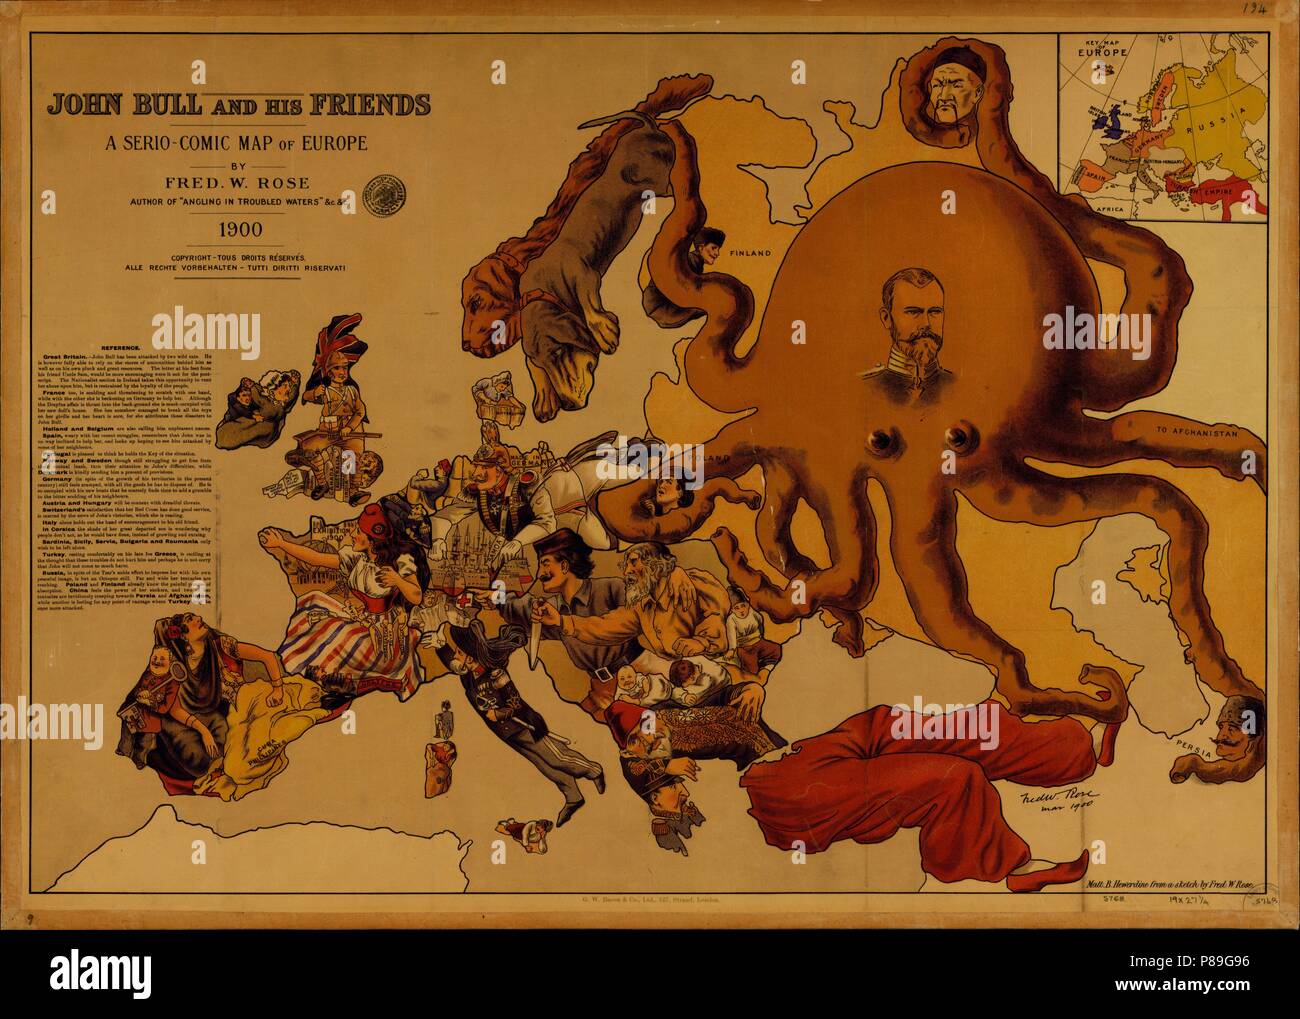 John Bull and his Friends. A Serio-Comic Map of Europe. Museum: PRIVATE COLLECTION. Stock Photo